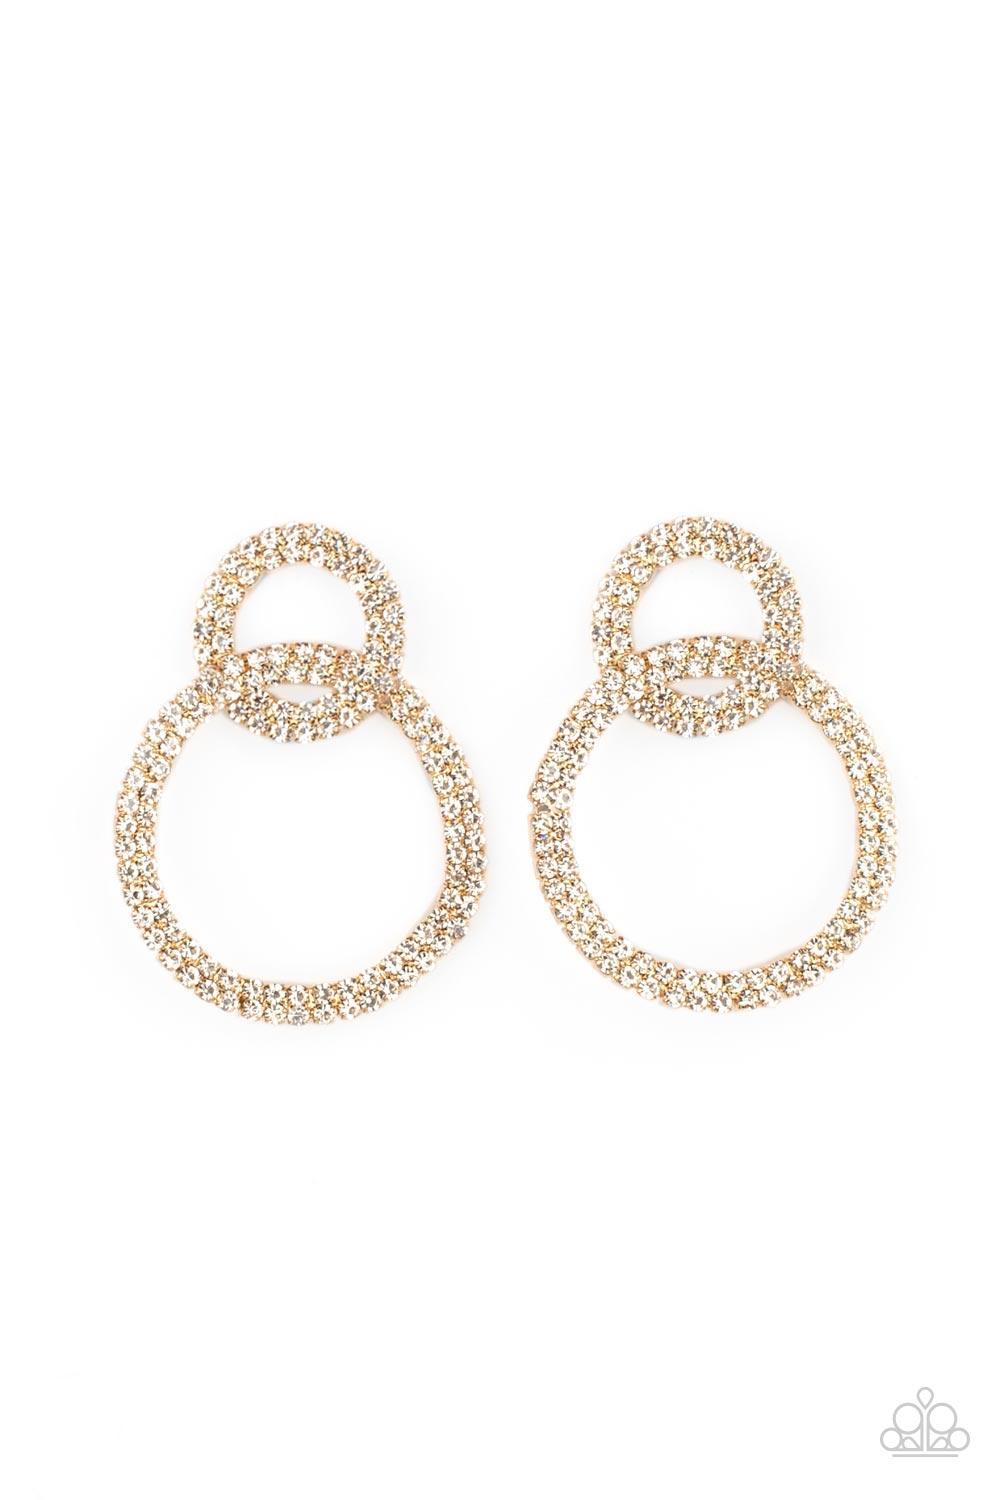 Paparazzi Accessories Intensely Icy - Gold Rows of sparkly white rhinestones encircle into two interconnected hoops, creating a jaw-dropping lure. Earring attaches to a standard post fitting. Sold as one pair of post earrings. Earrings